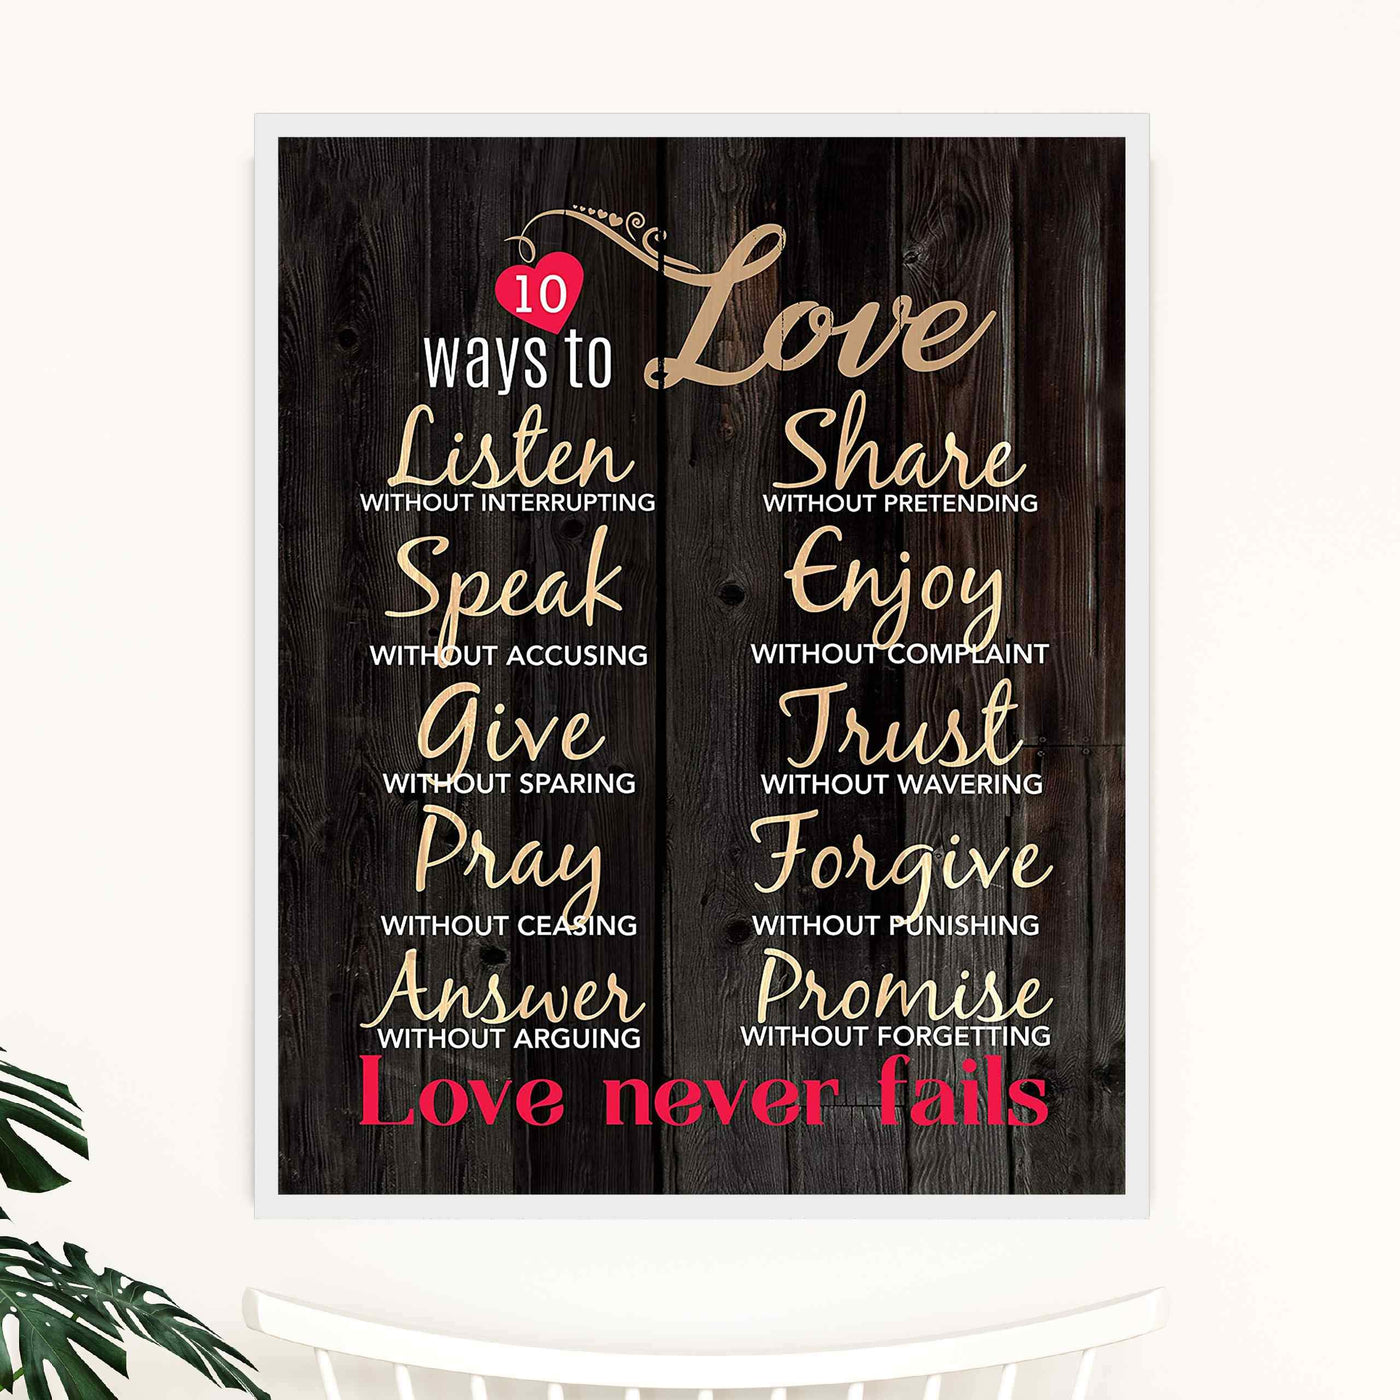 10 Ways To Love Inspirational Wall Art Decor -11 x 14" Love & Marriage Print w/Replica Wood Design-Ready to Frame. Romantic Gift & Perfect Wedding Sign. Love Never Fails! Printed on Paper-Not Wood.